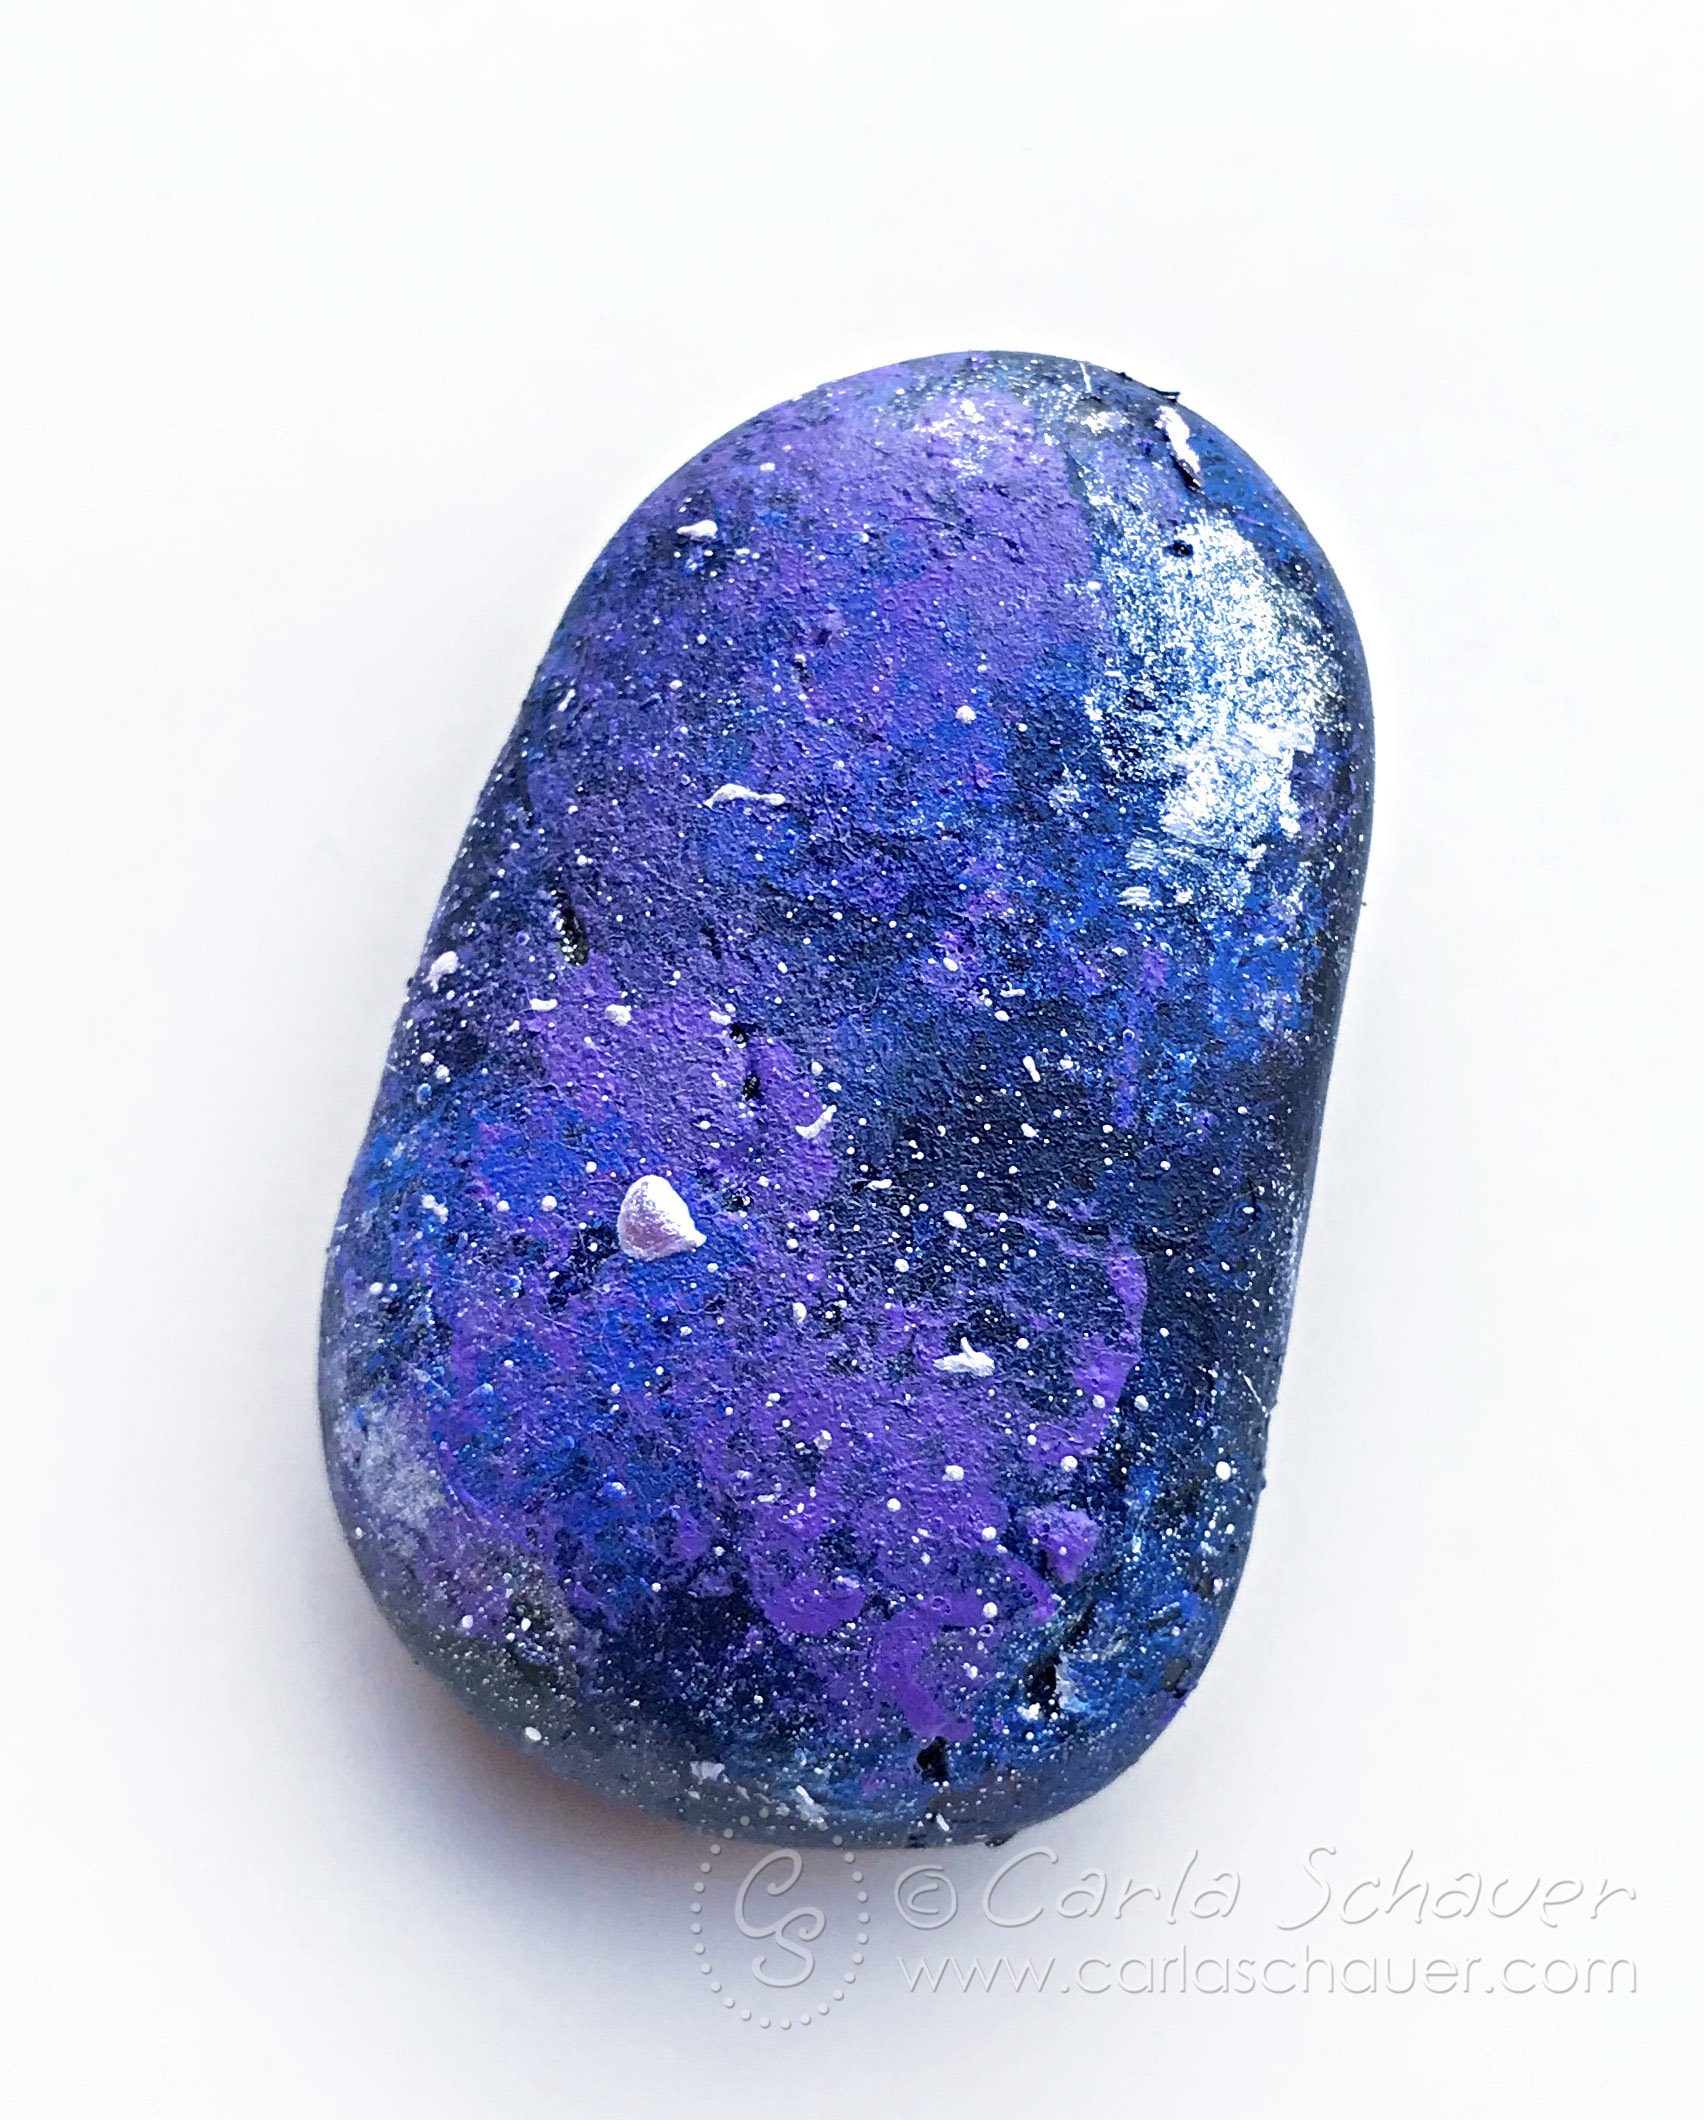 Rock painted to look like a galaxy on white background.